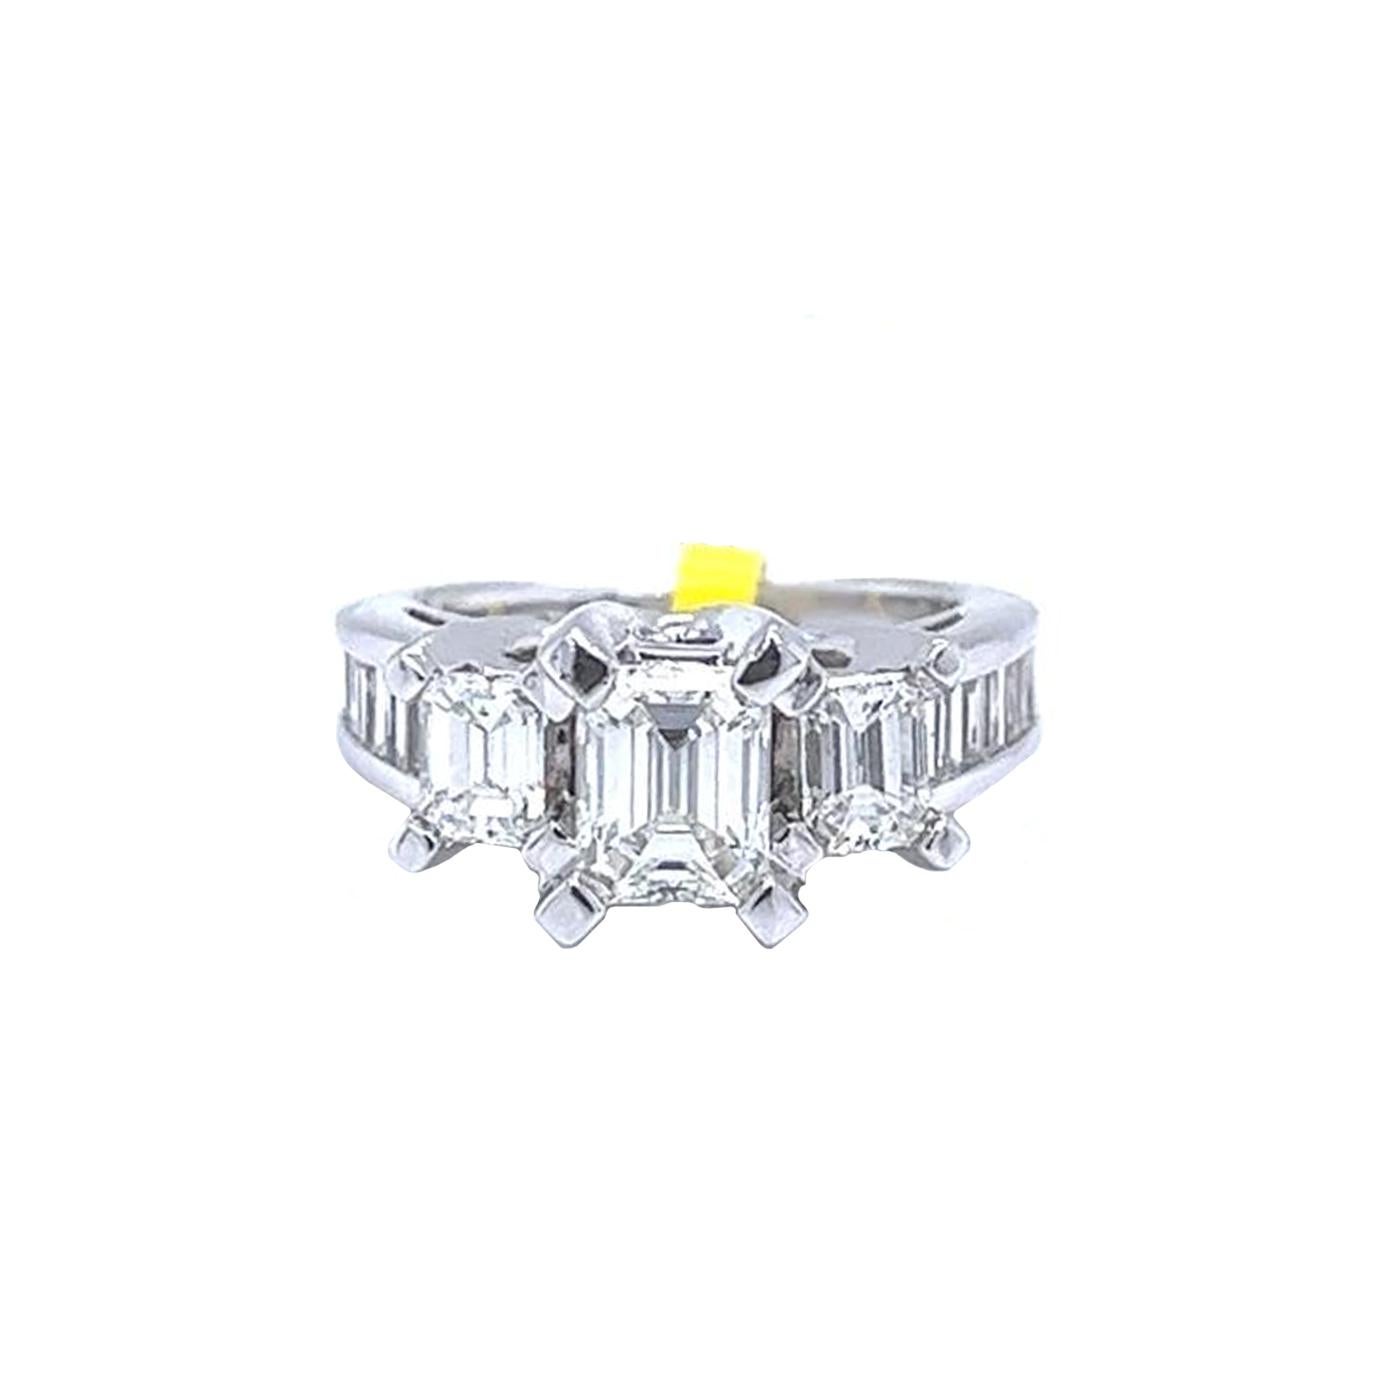 14 Karat White Gold Emerald and baguette Natural diamond ring featuring a Center emerald cut diamond weighing 0.75 carats. The emerald is accented by 0.25 Carat Side diamonds and 0.65 Carat baguette Diamonds. The ring fits a size 6 finger. Its total